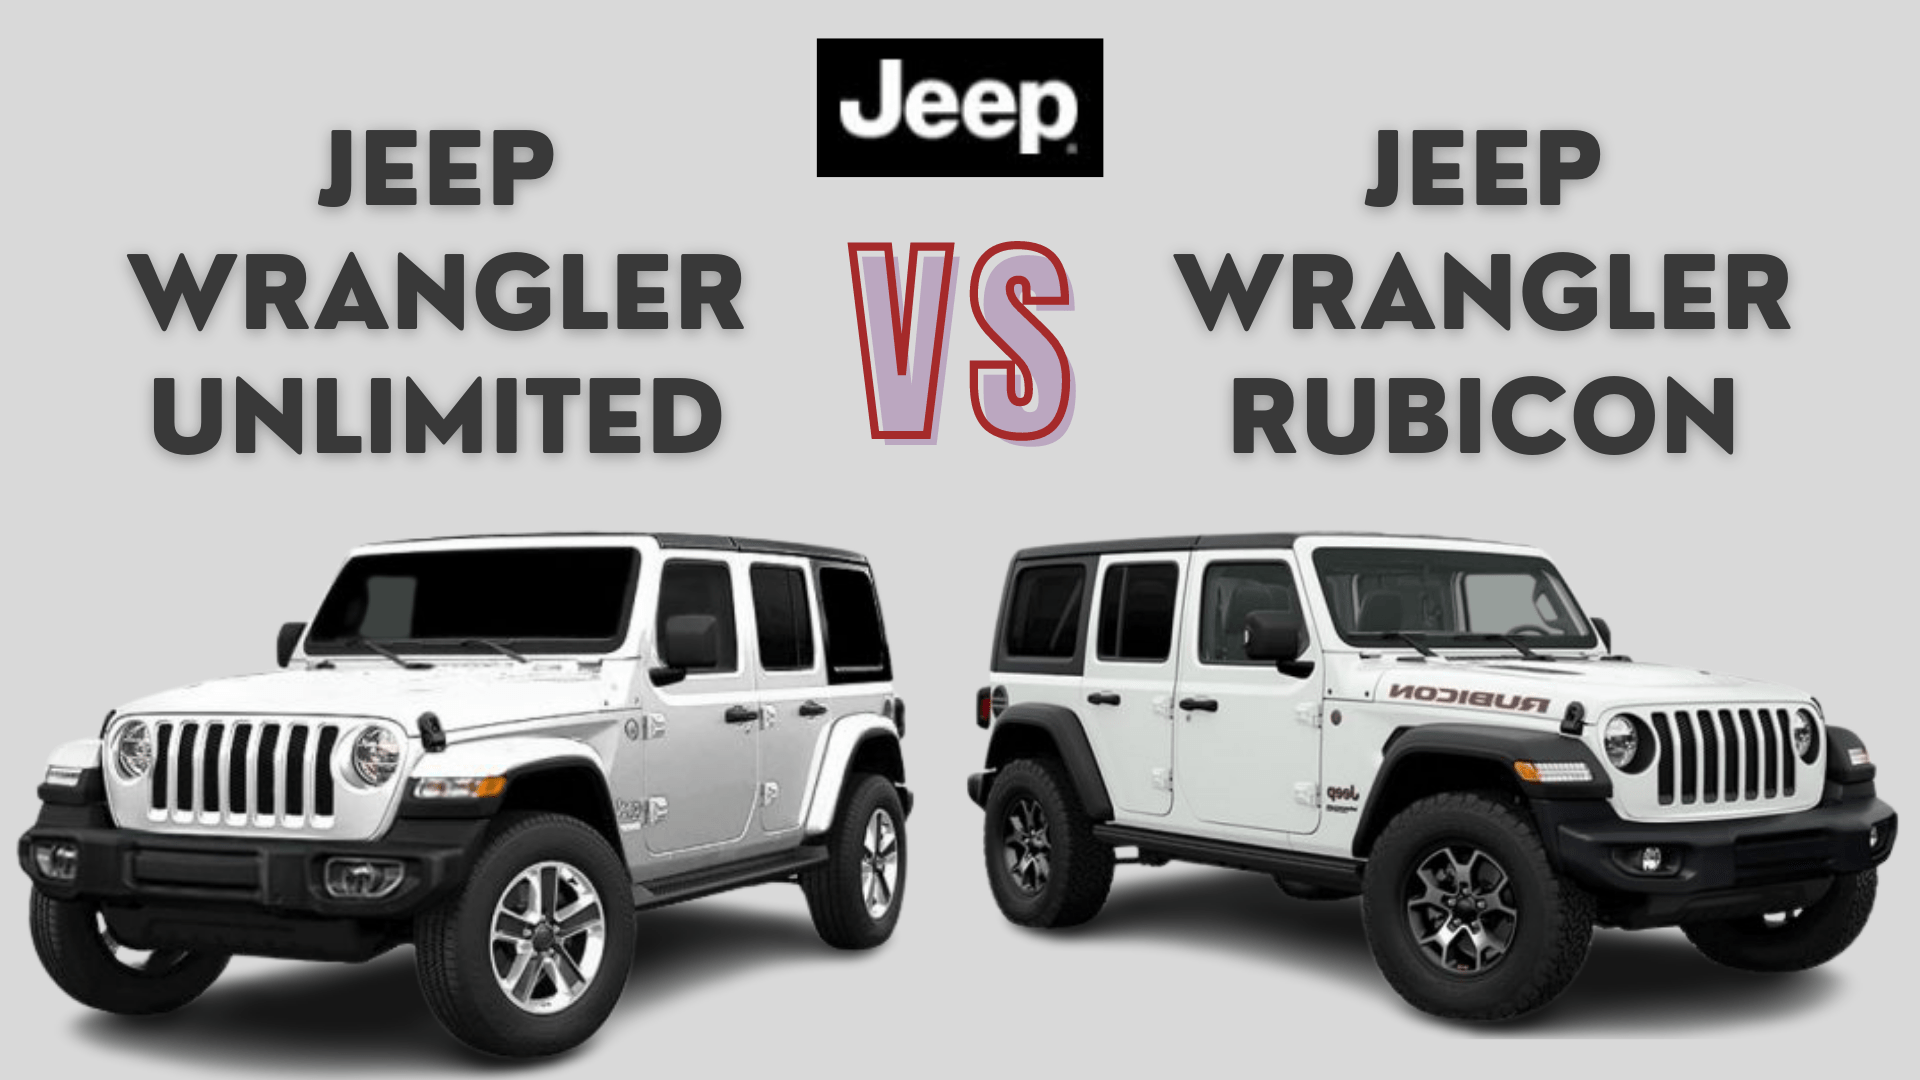 Differences & Similarities Between Jeep Wrangler Unlimited & Rubicon